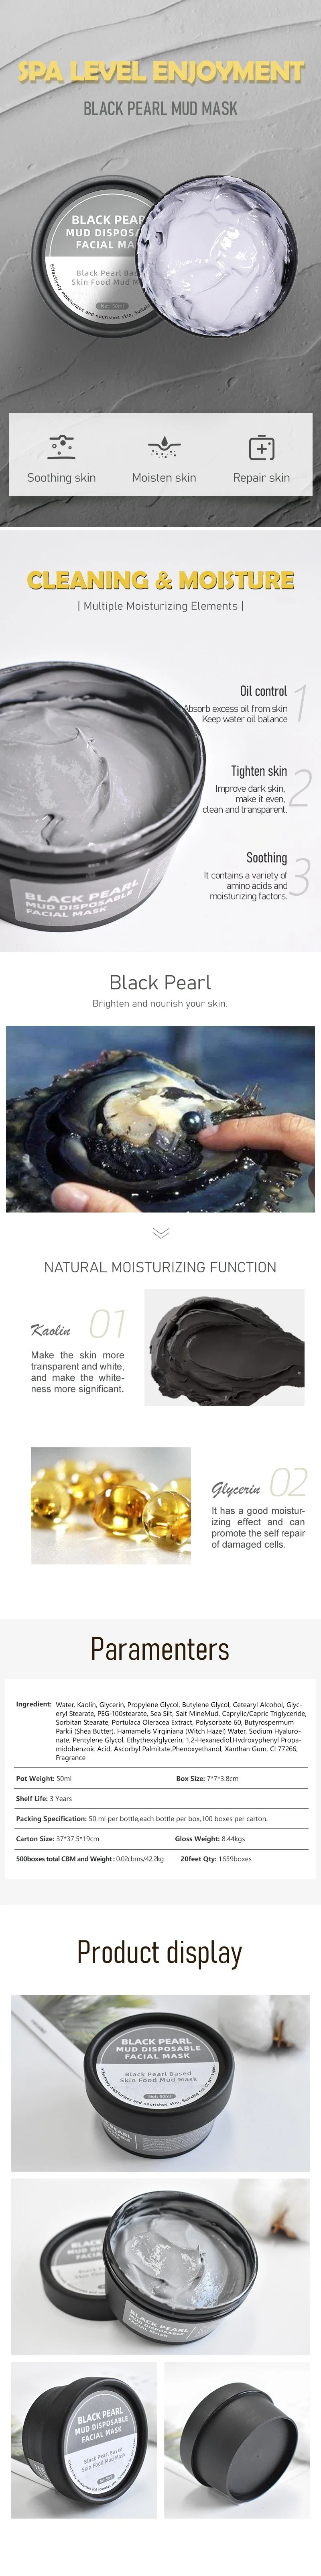 Best Selling Products Private Label Organic Mud Facial Mask Skin Care Black Pearl Clay Face Mask